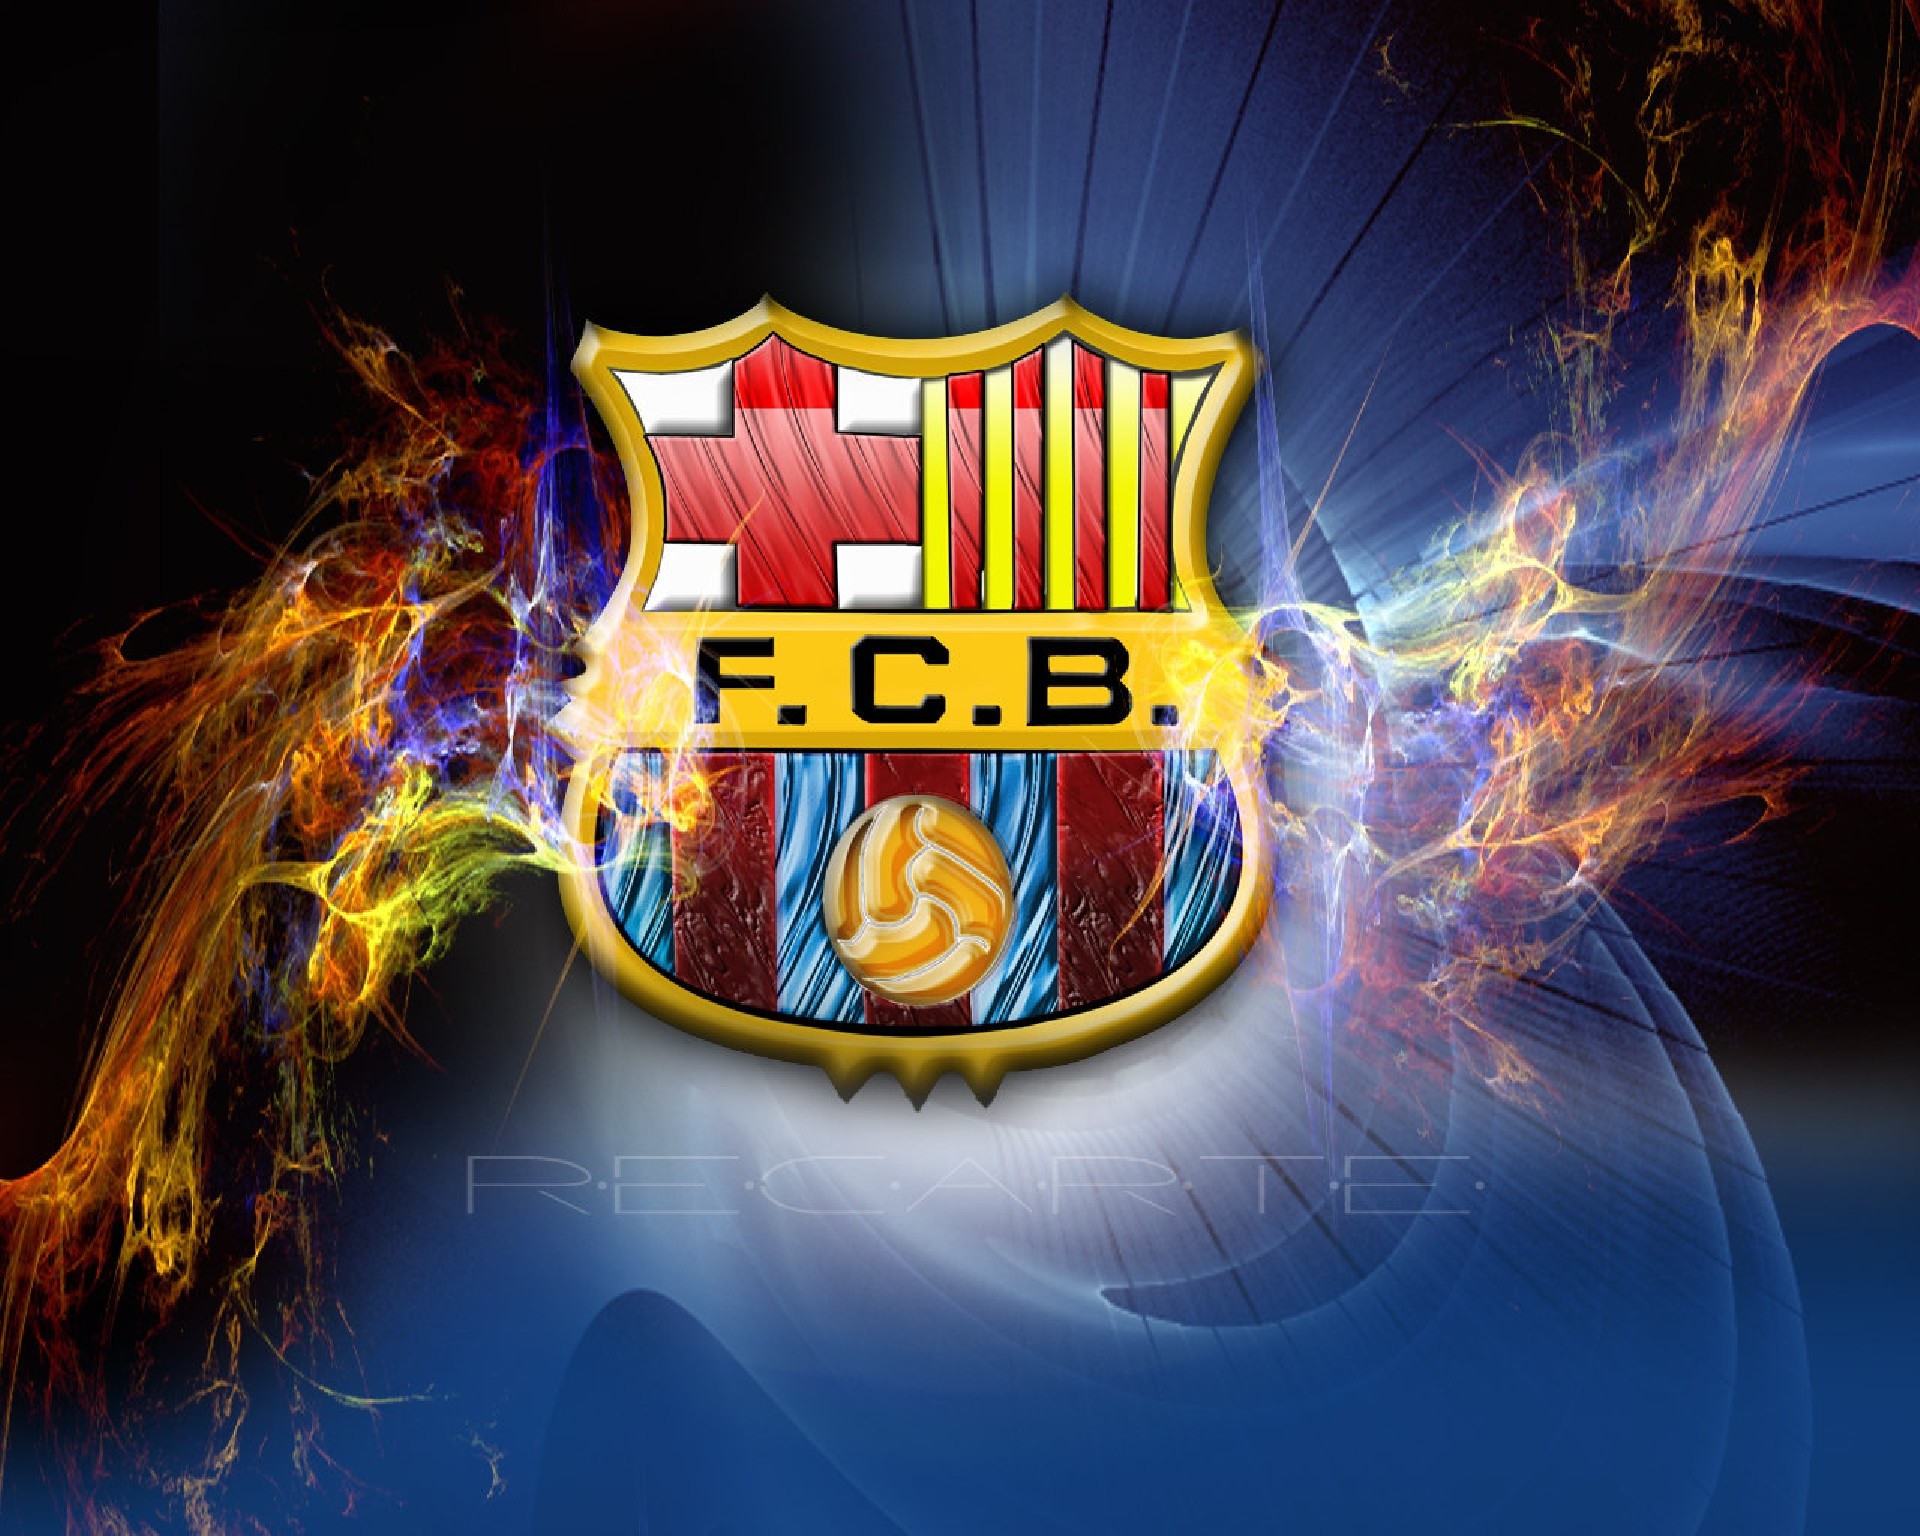 1920x1536 HD Wallpaper and background photos of FC Barcelona Logo Wallpaper for fans  of FC Barcelona images.